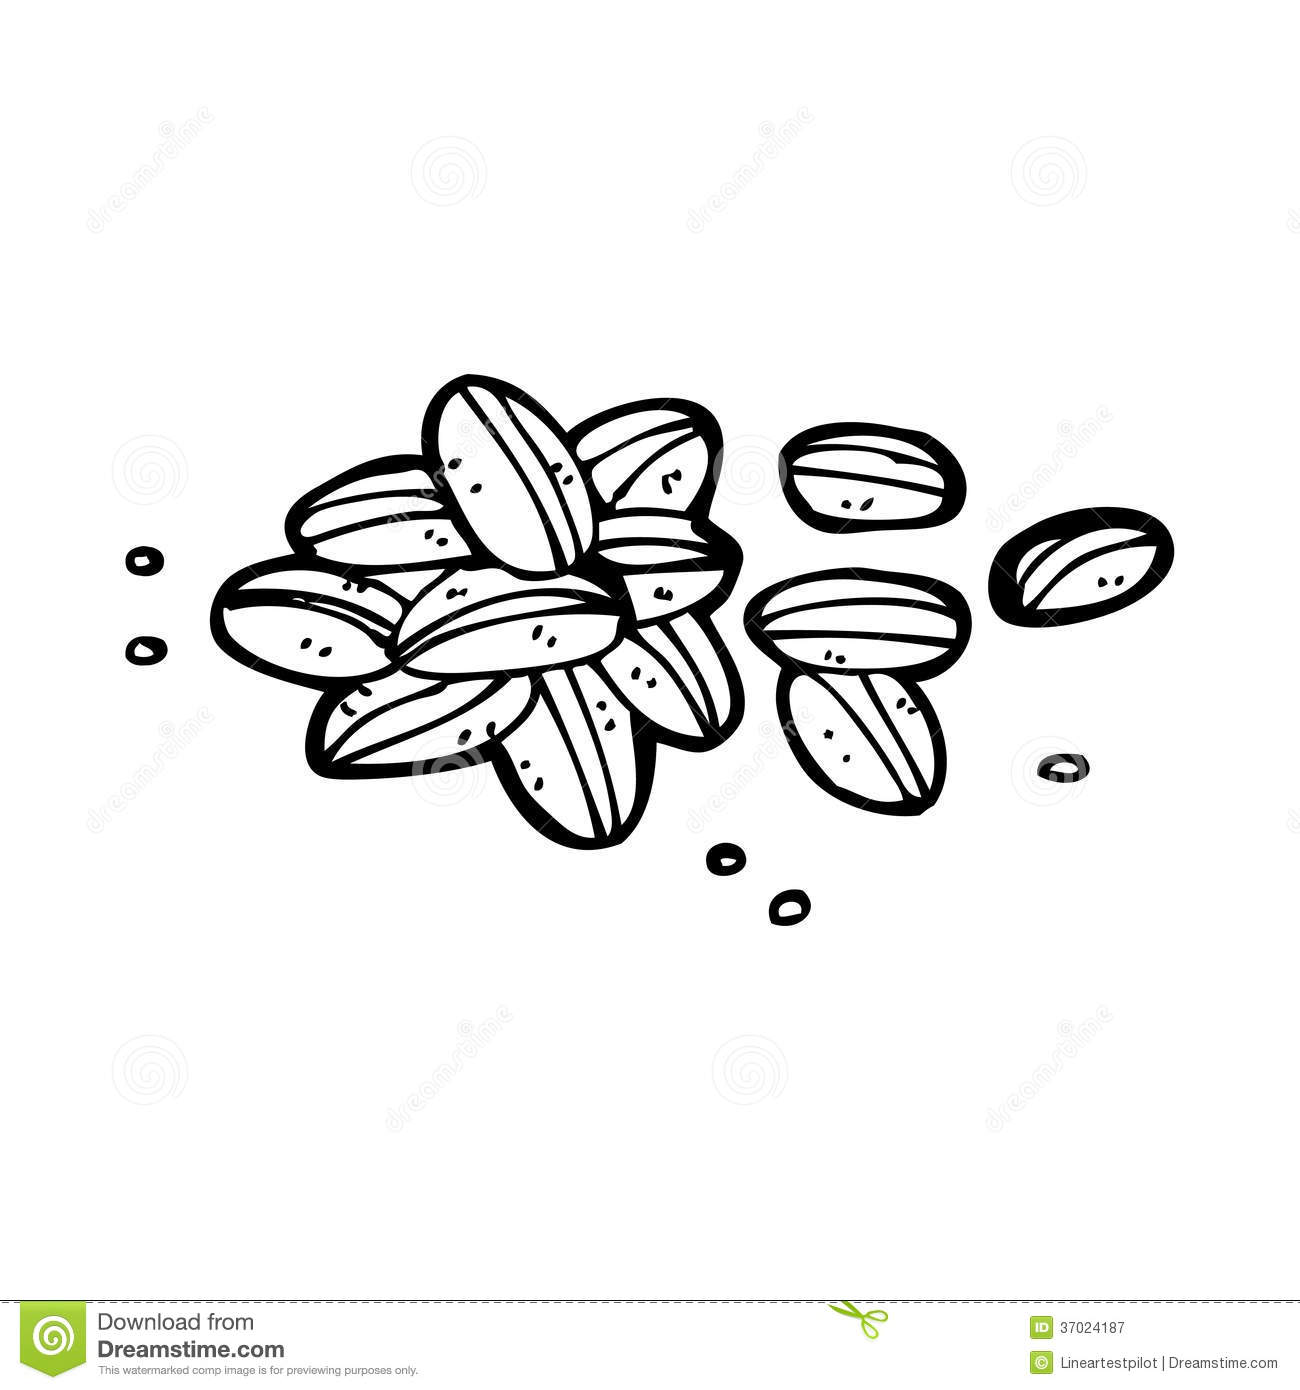 Green Beans Clipart Black And White